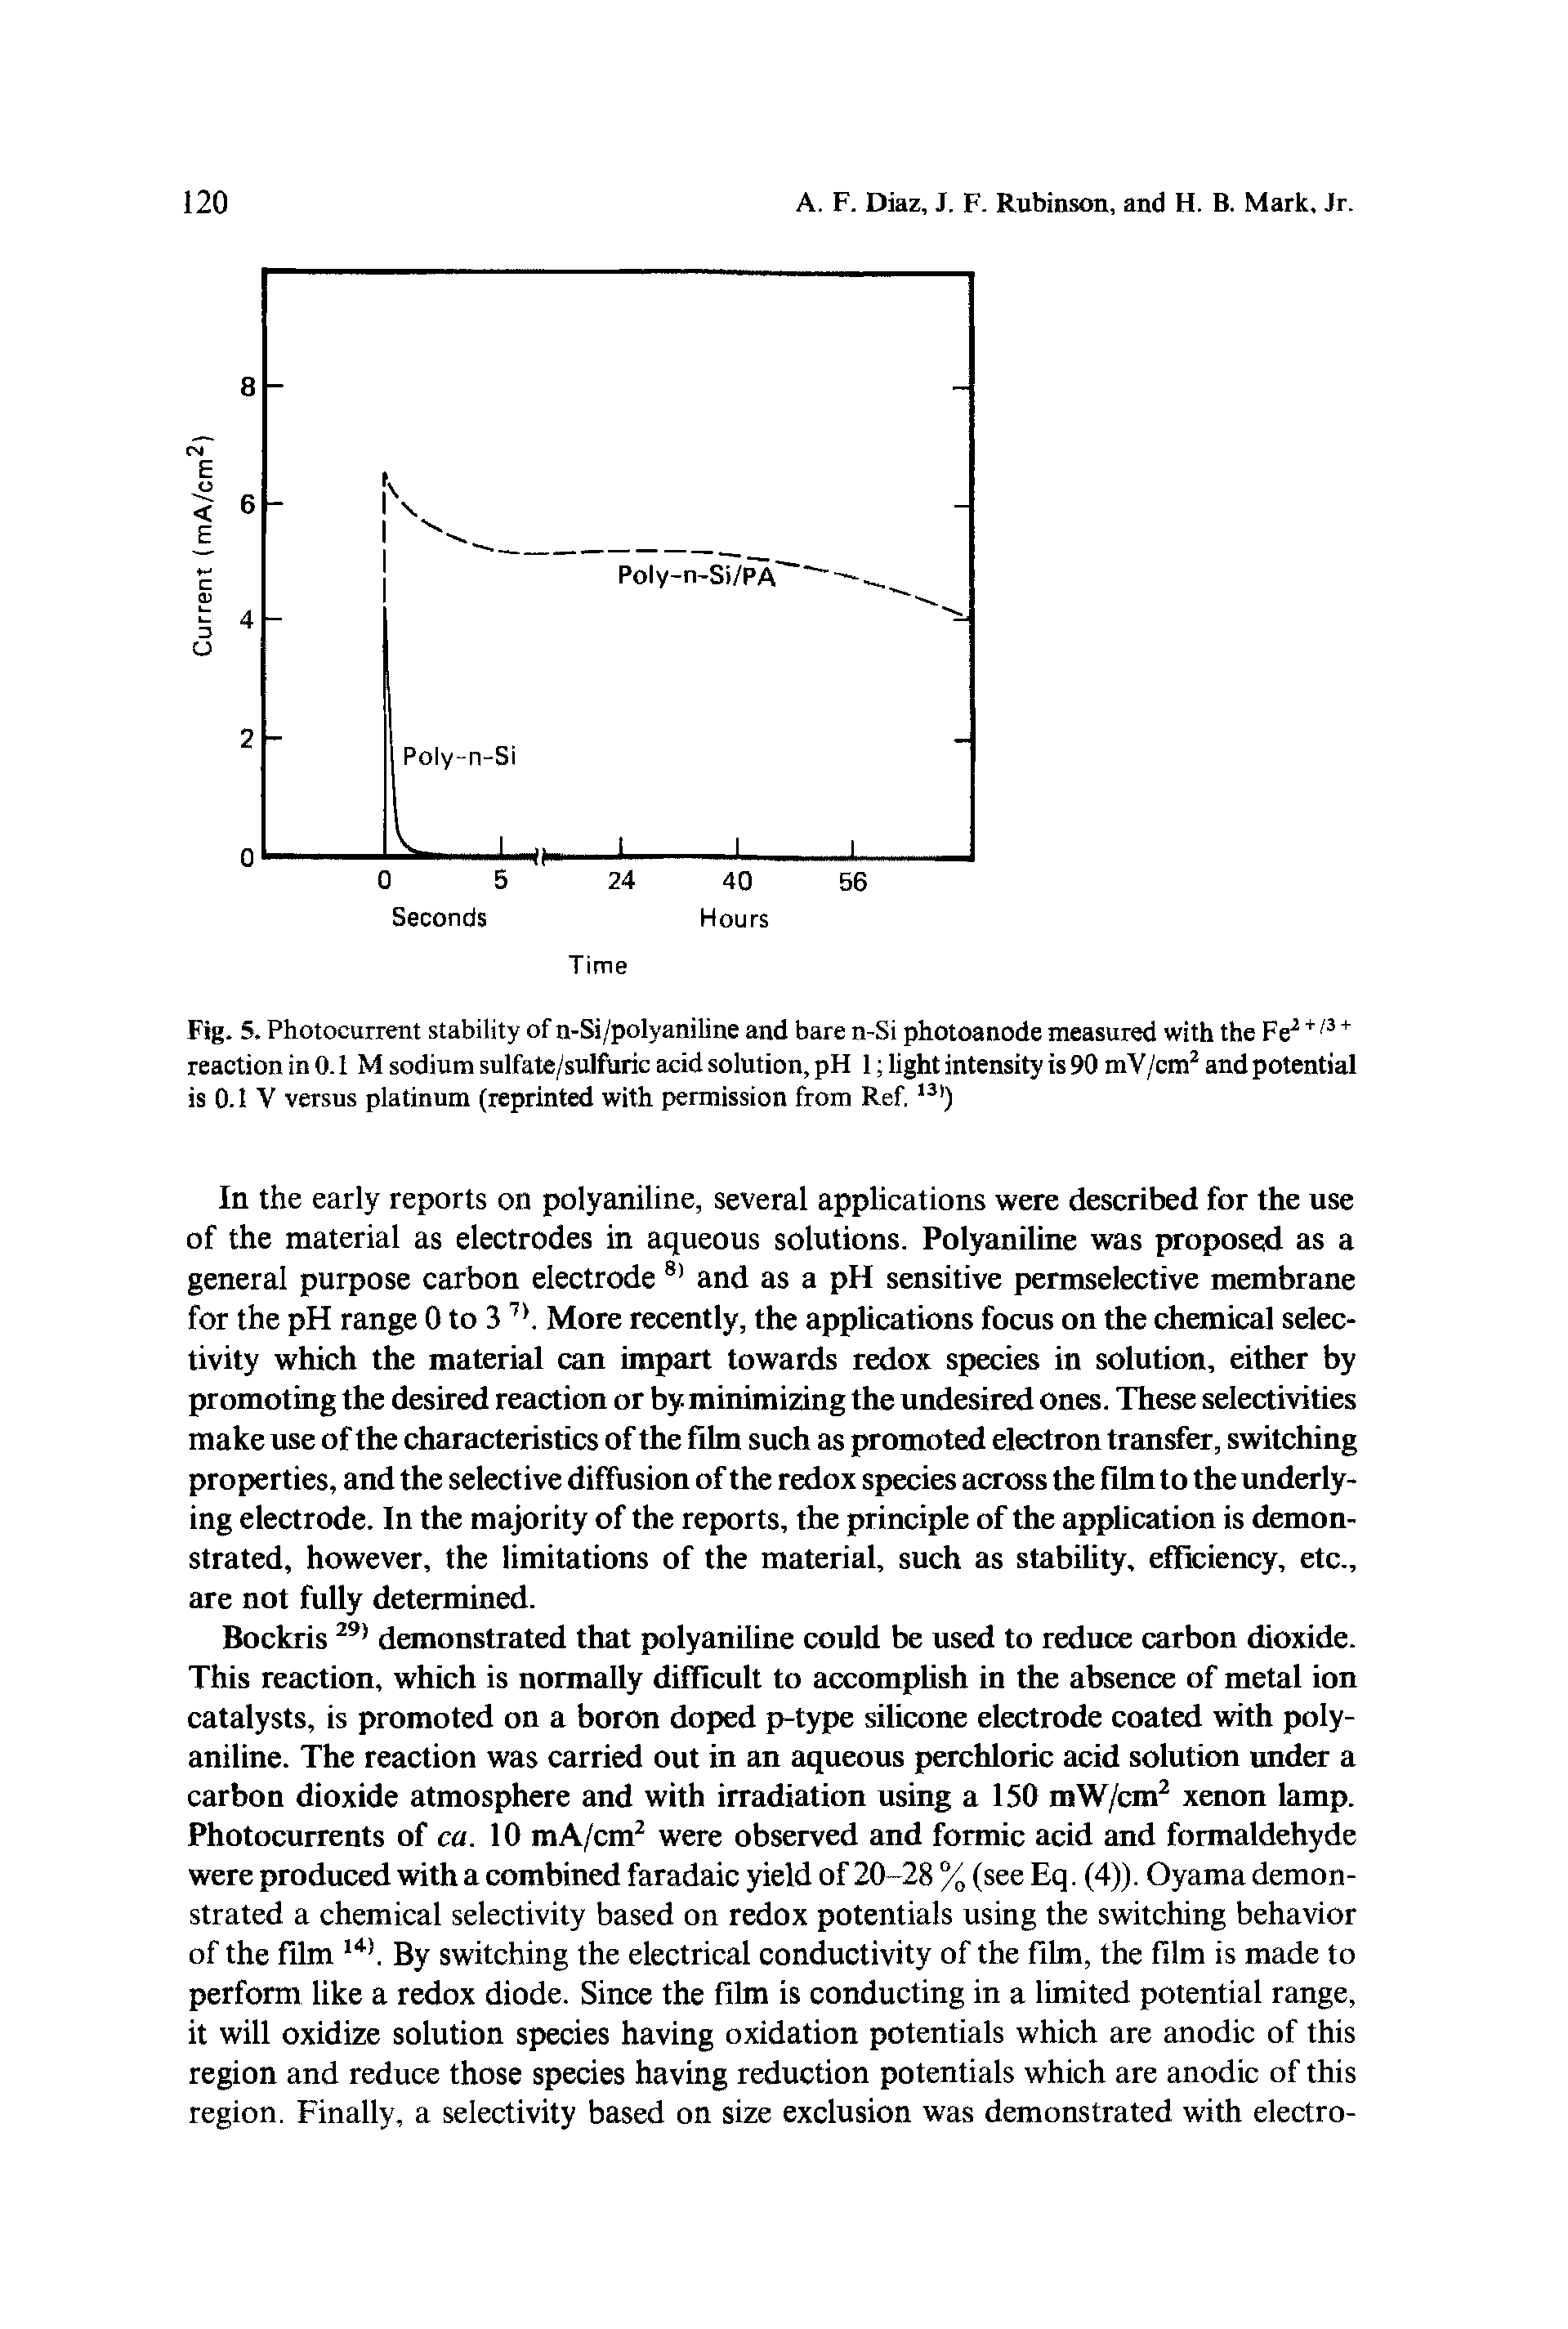 Fig. 5. Photocurrent stability of n-Si/polyaniline and bare n-Si photoanode measured with the Fe reaction in 0.1 M sodium sulfate/sulfuric acid solution, pH 1 light intensity is 90 mV/cm and potential is 0.1 V versus platinum (reprinted with permission from Ref.